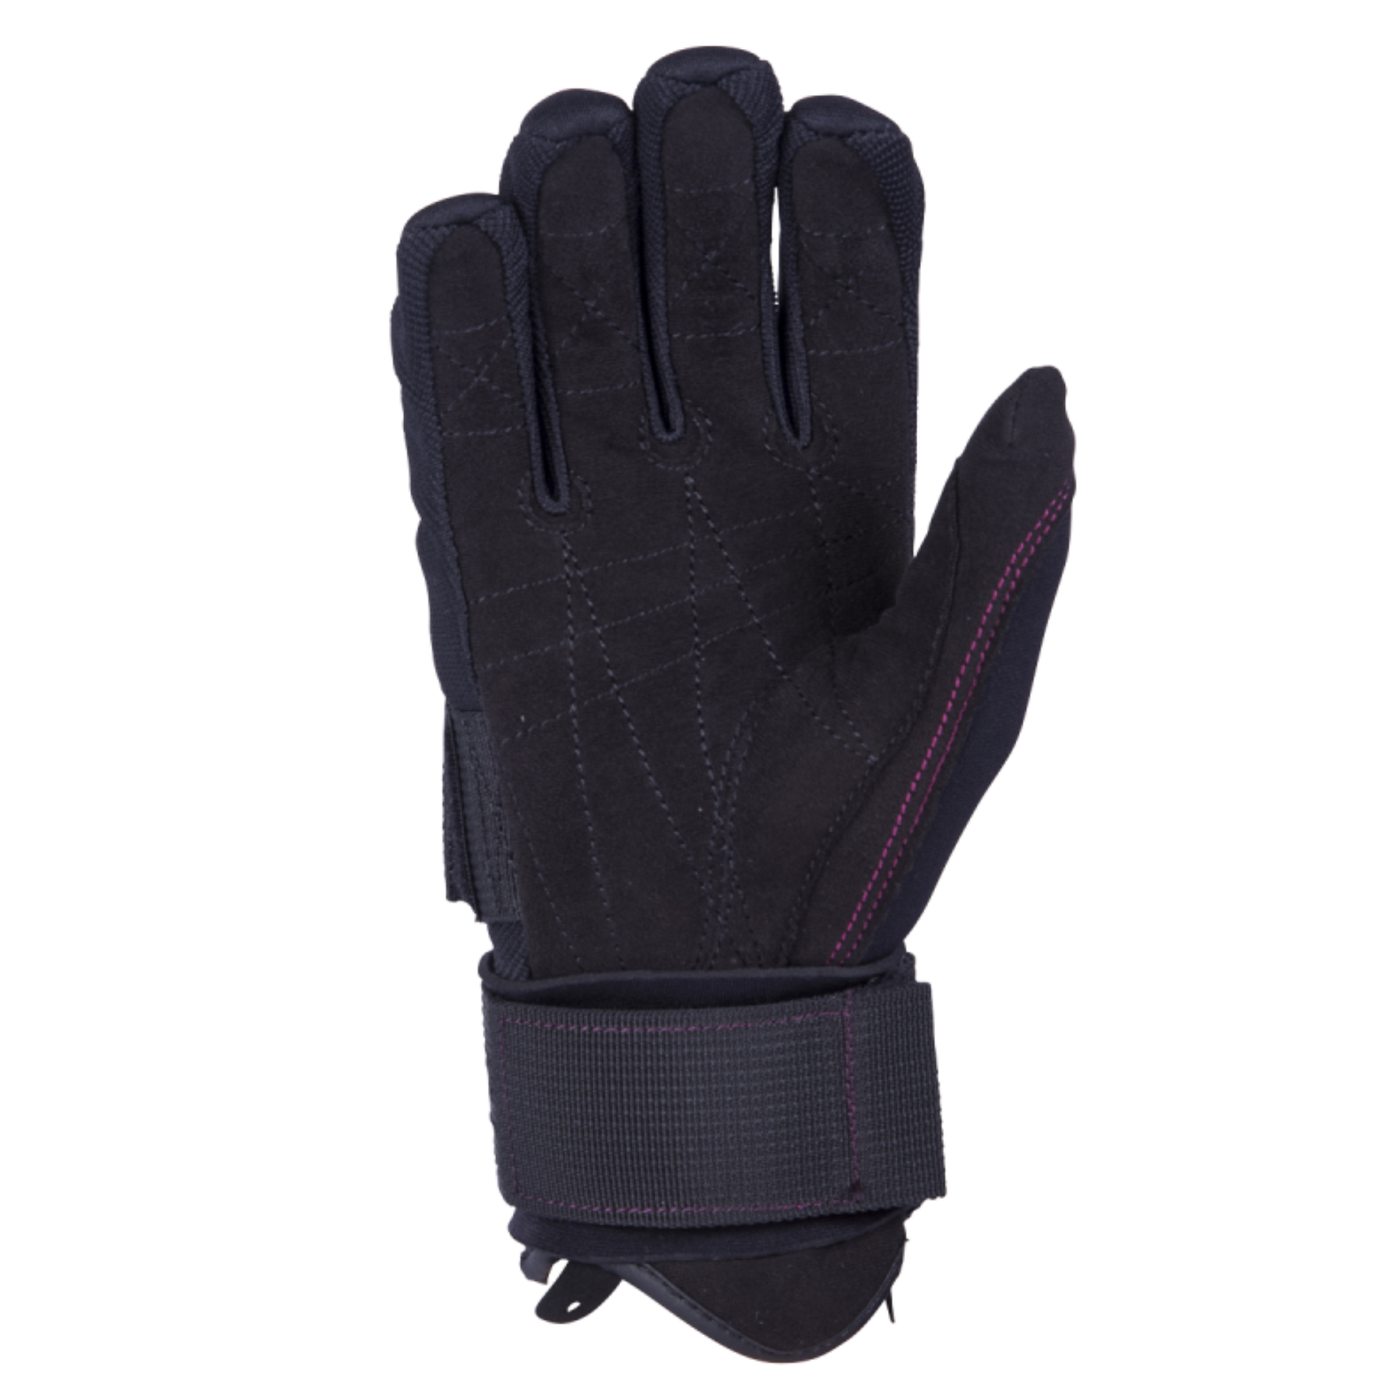 HO Women's World Cup Skiing Gloves